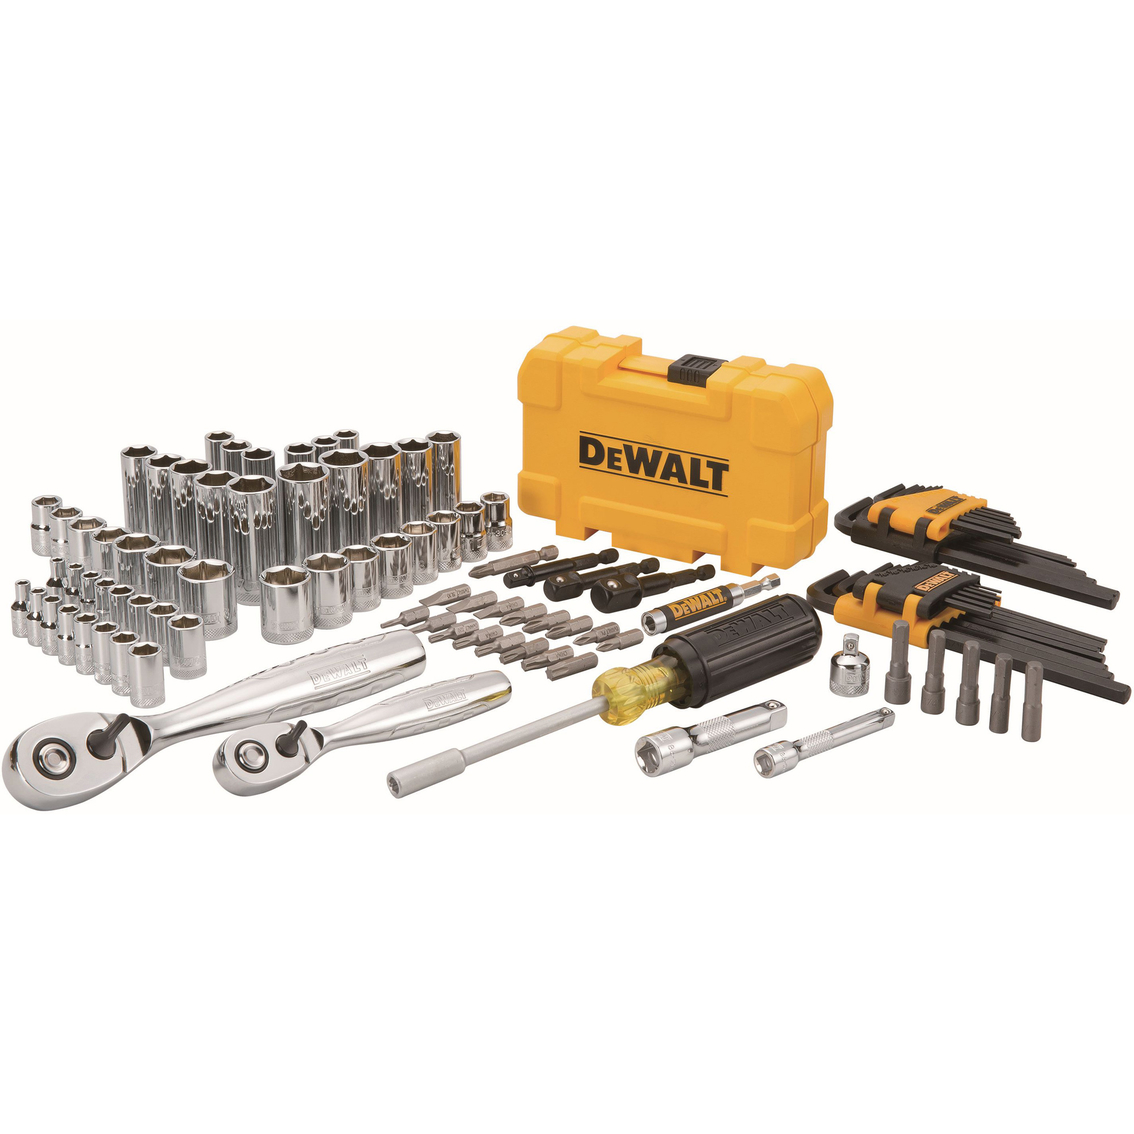 DeWalt 1/4 in. and 3/8 in. Drive 108 pc. Mechanic's Tool Set - Image 3 of 4